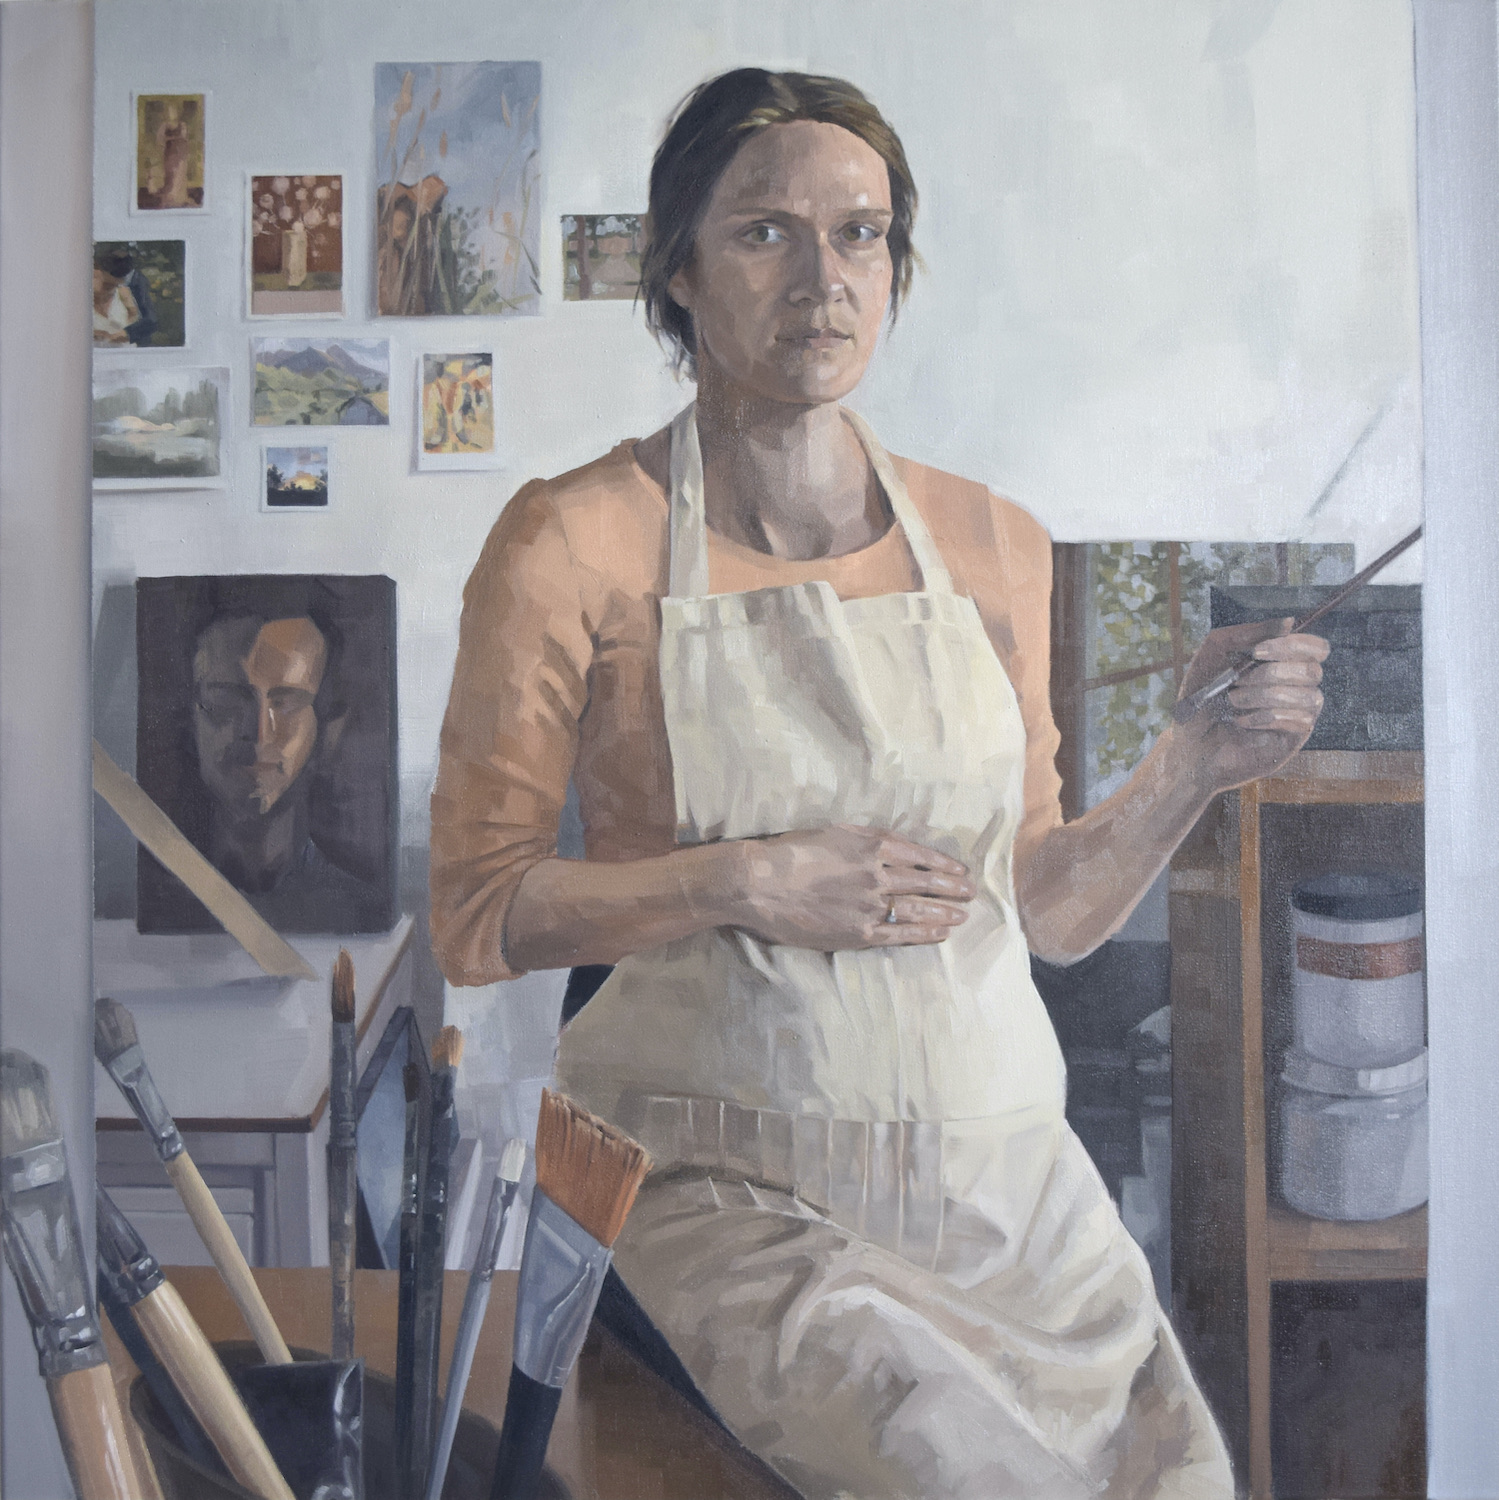 'The Artist Creating', Amelia Schutter, Oil on canvas, 80 x 80 cm